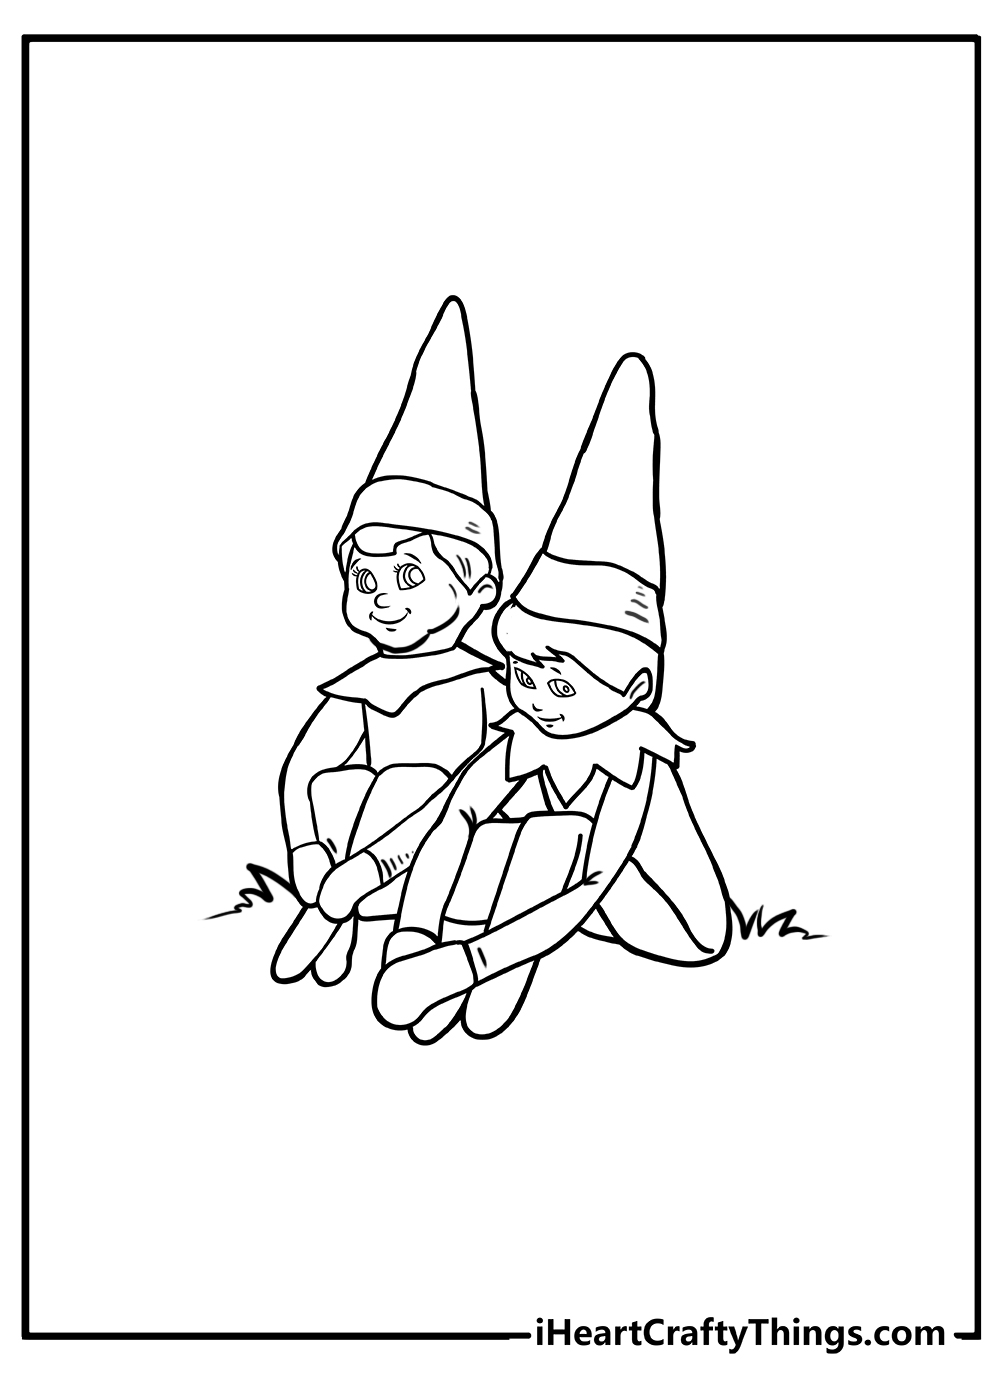 The Elf On The Shelf Coloring Pages - Coloring Nation